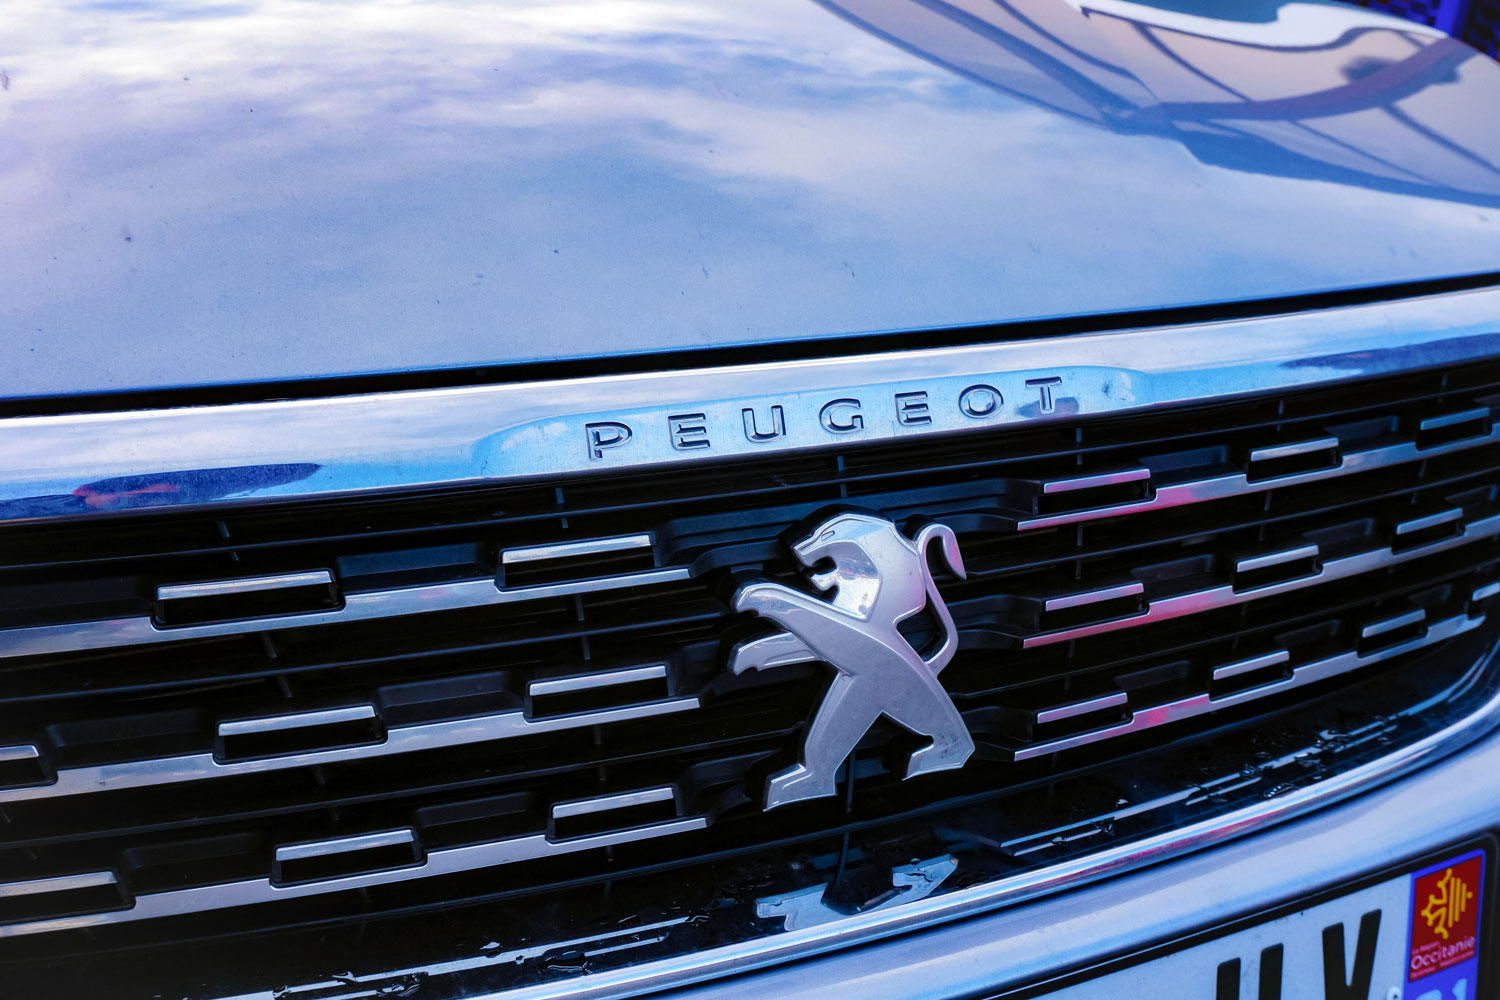  Modern design of the radiator grille of the New 308 hatchback car from the French manufacturer PSA Peugeot-Citroën, featuring the lion logo on the center and chrome fittings